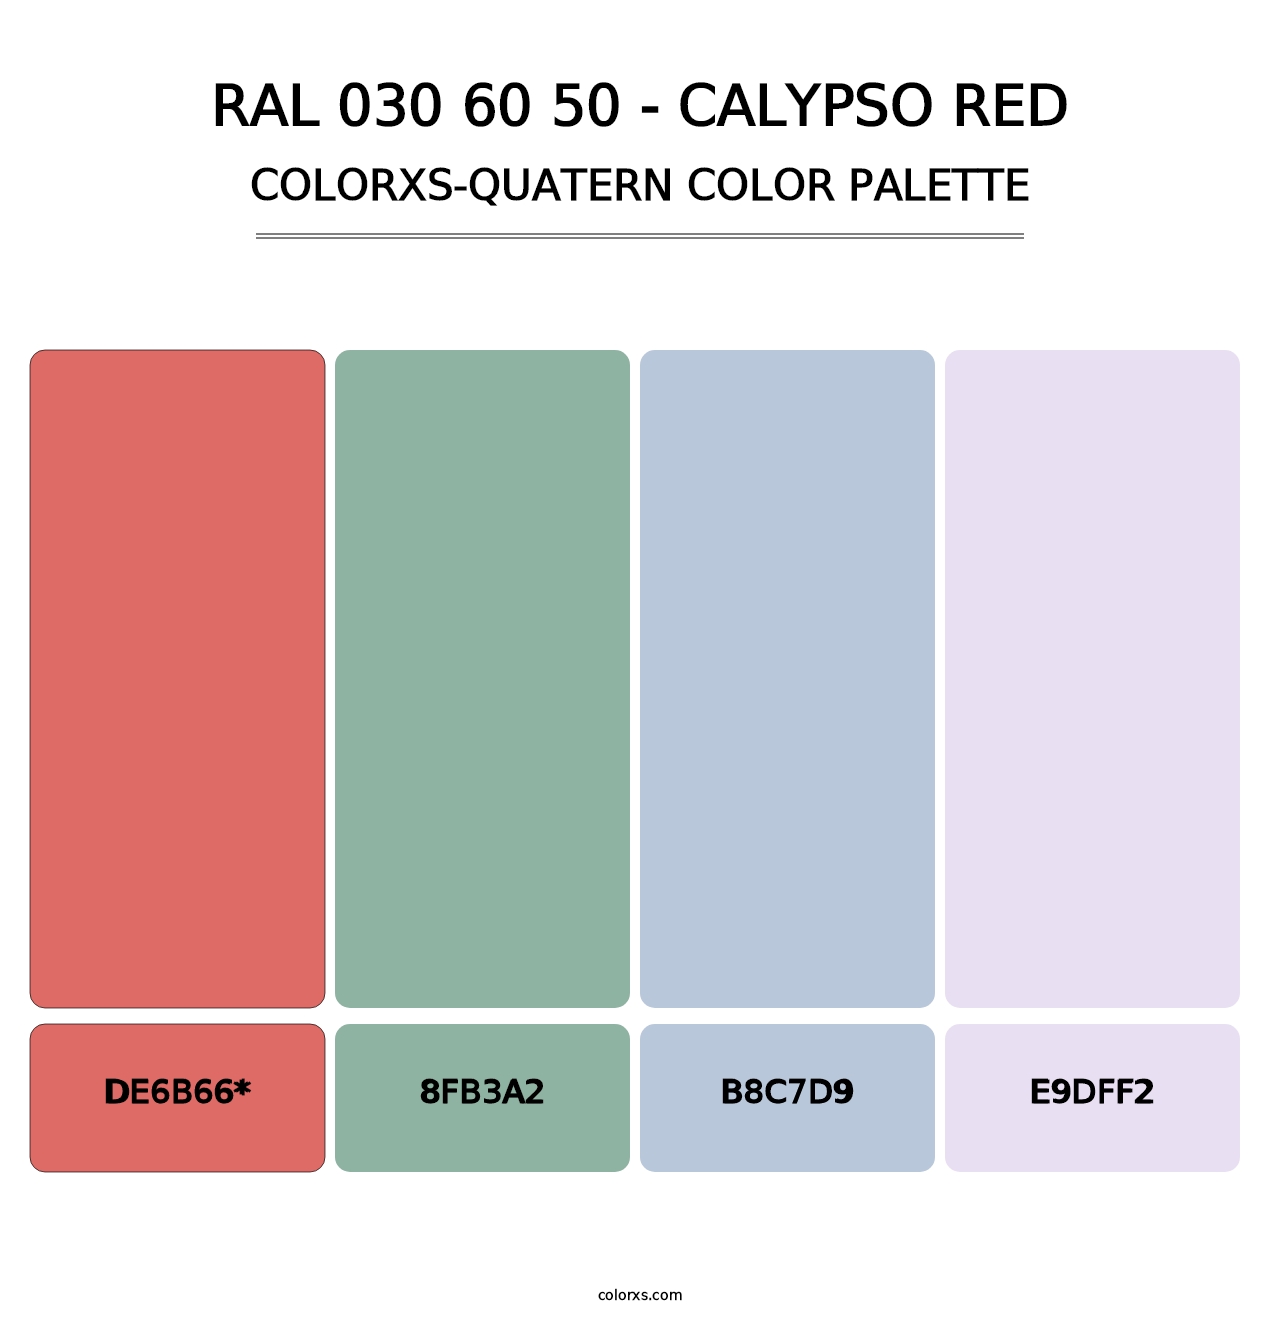 RAL 030 60 50 - Calypso Red - Colorxs Quatern Palette